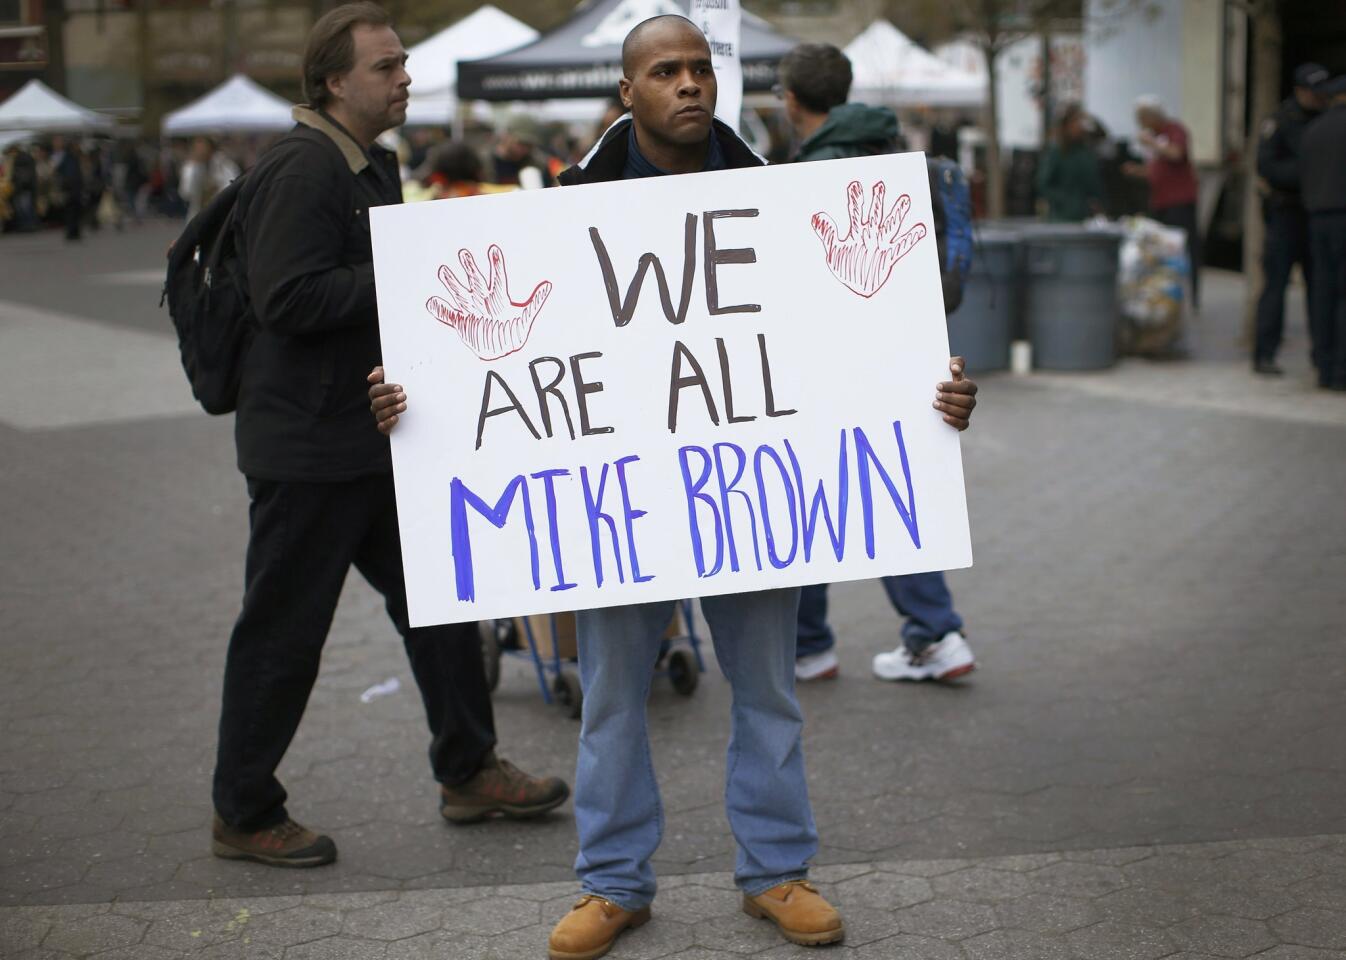 A man protests the August shooting death of Michael Brown in Ferguson, Mo., during a Dec. 1 rally at Union Square in New York City.